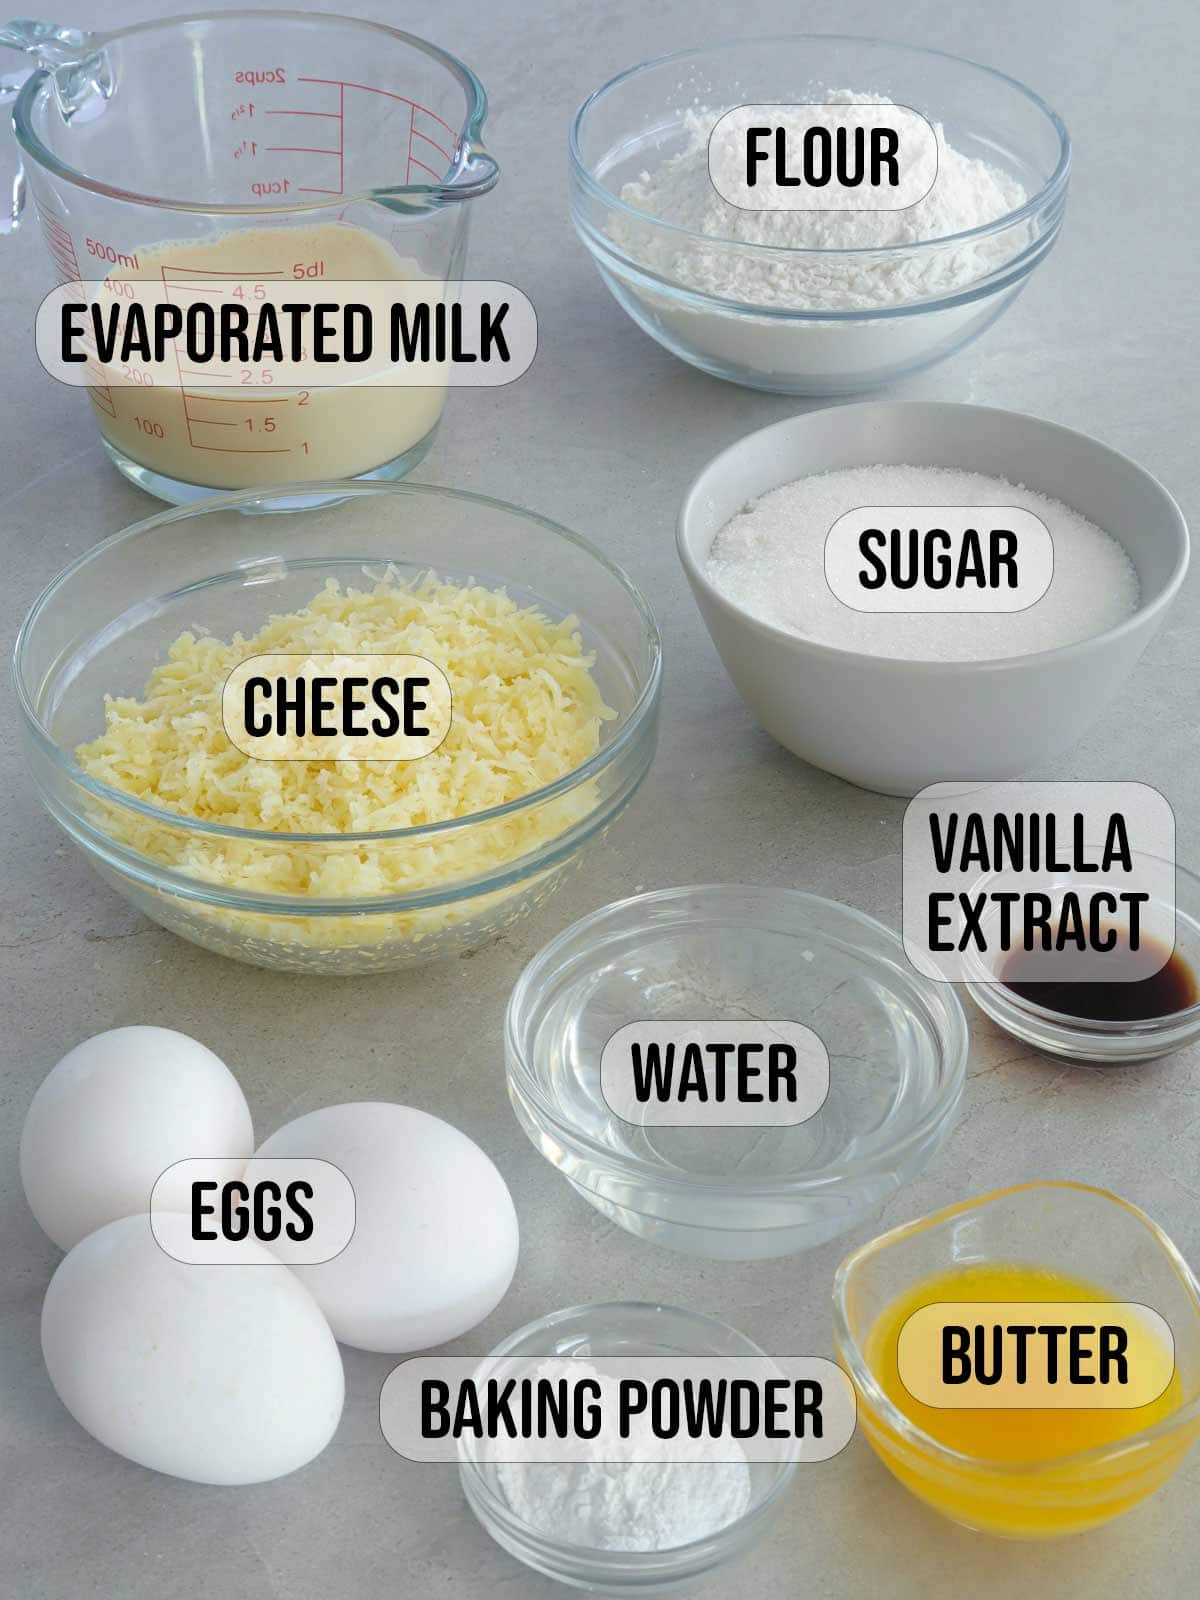 evaporated milk, flour, baking powder, eggs, butter, water, sugar, flour, vanilla extract, shredded cheese in bowls.